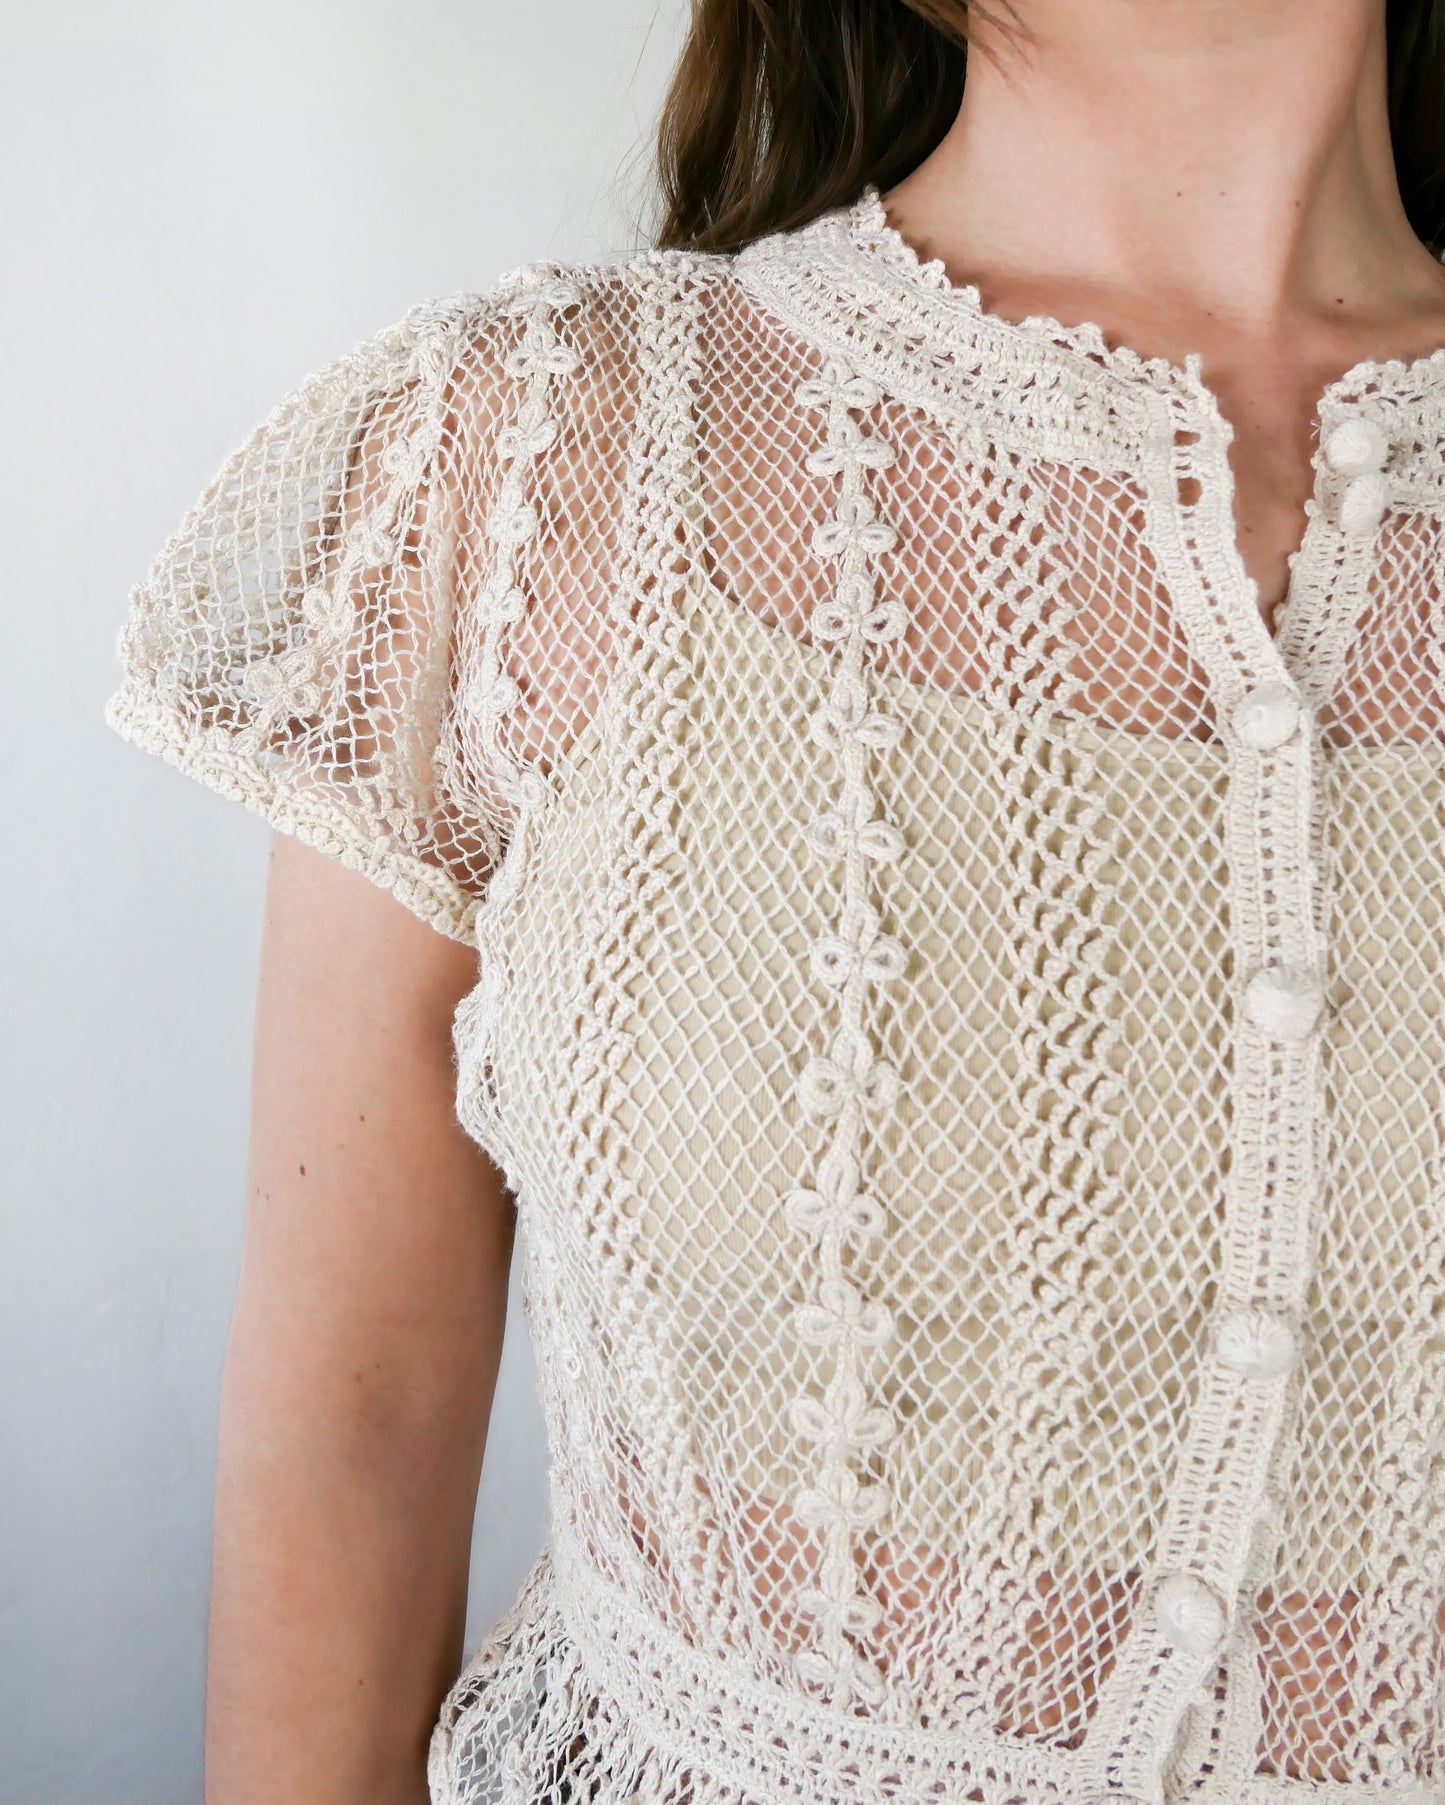 Closeup of front of crochet top in natural color. A Lim's original vintage crochet piece from the 1980s, this top was hand crocheted with very fine threads to create a delicate, lightweight, and transparent feel. Puffed sleeves, a high waist, and flared hem lend the top a whimsical yet tailored look. The top is reversible and can be buttoned up the front or back. Natural color.